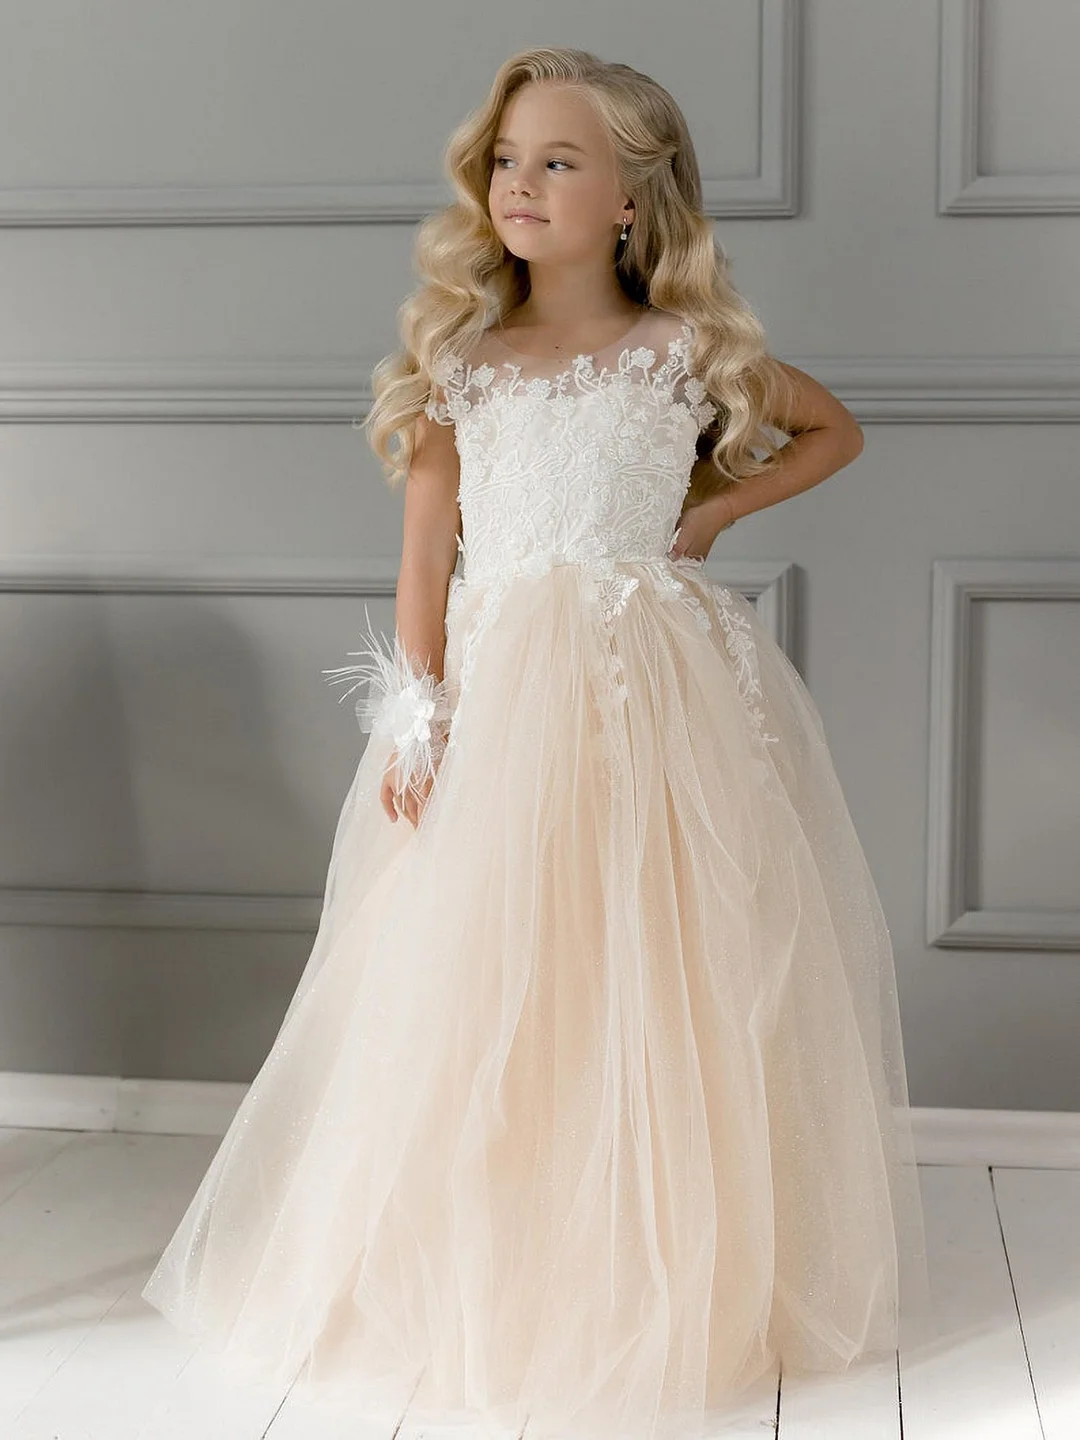 Bellasprom Simple Sleeveless A-line Flower Girl Dresses Tulle with Appliques Lace Pearls